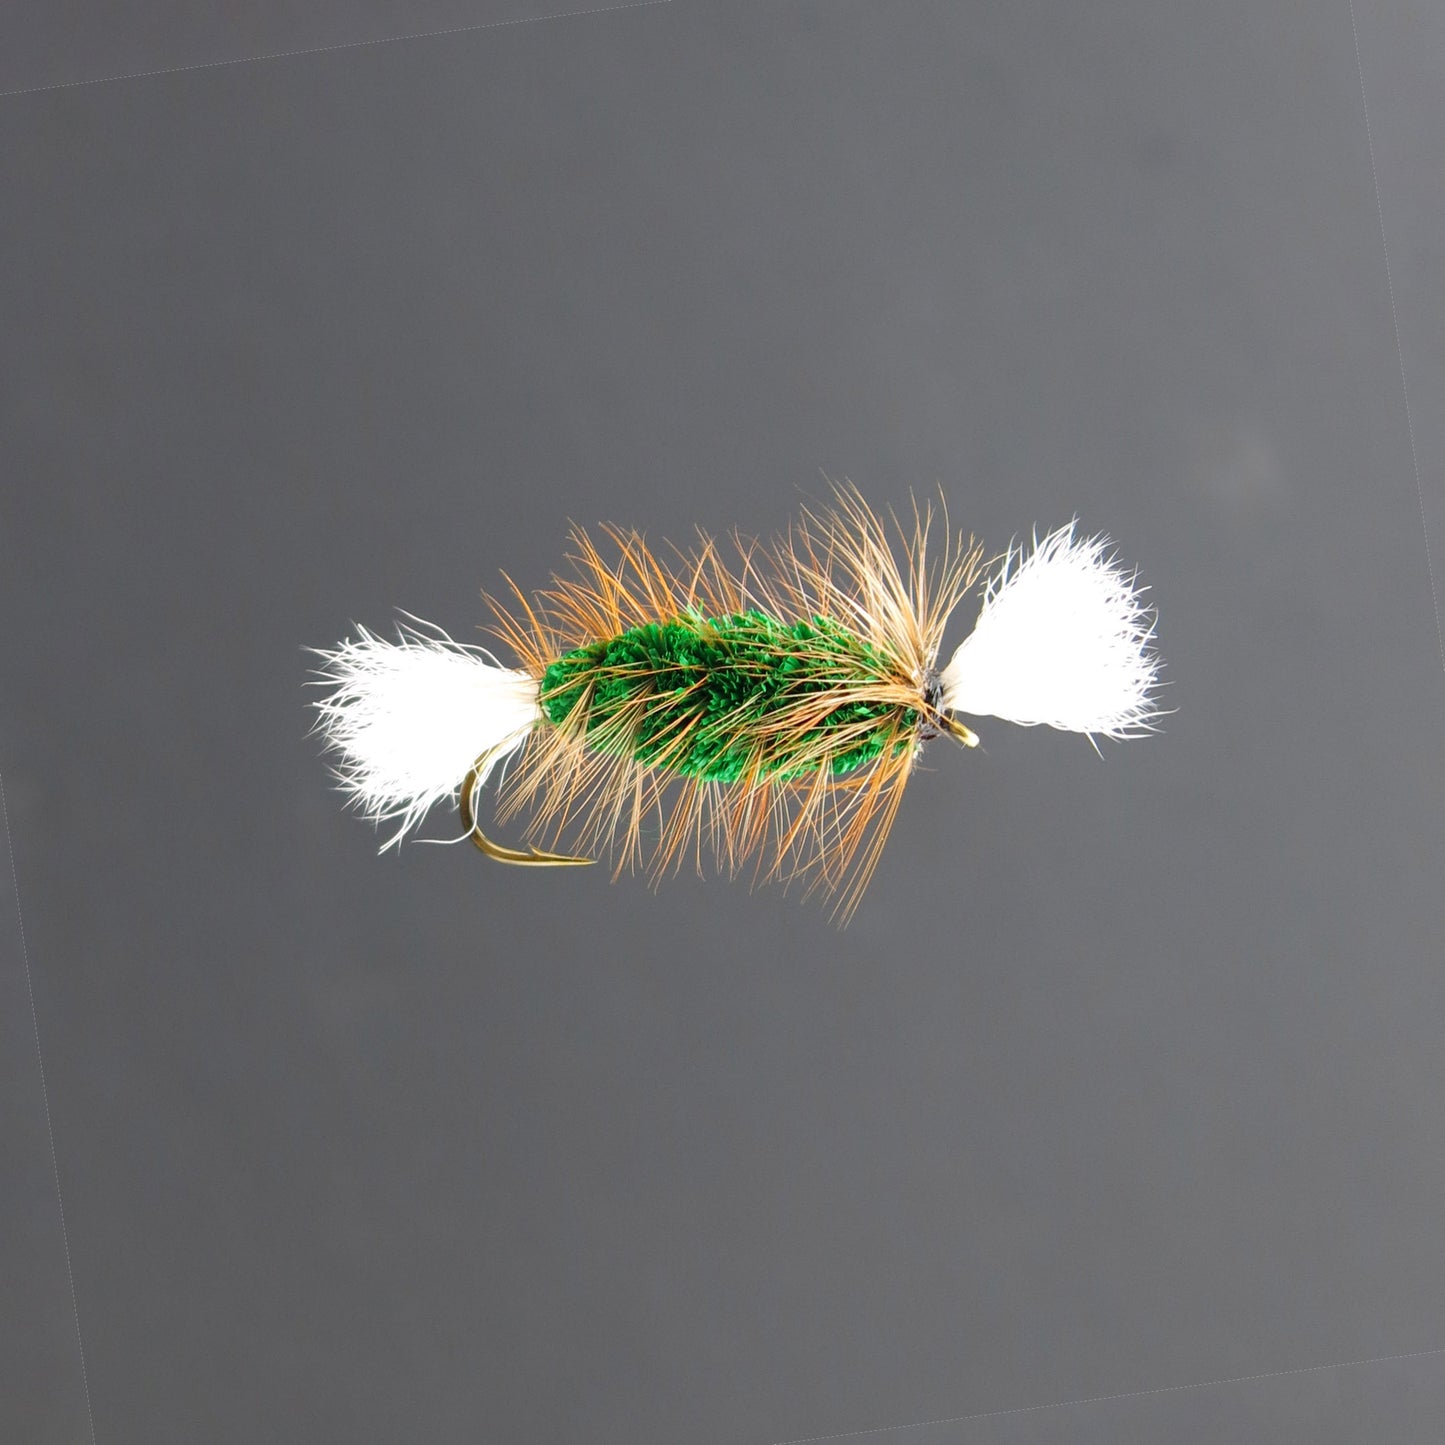 Green Cigar – White Tail – Brown Hackle